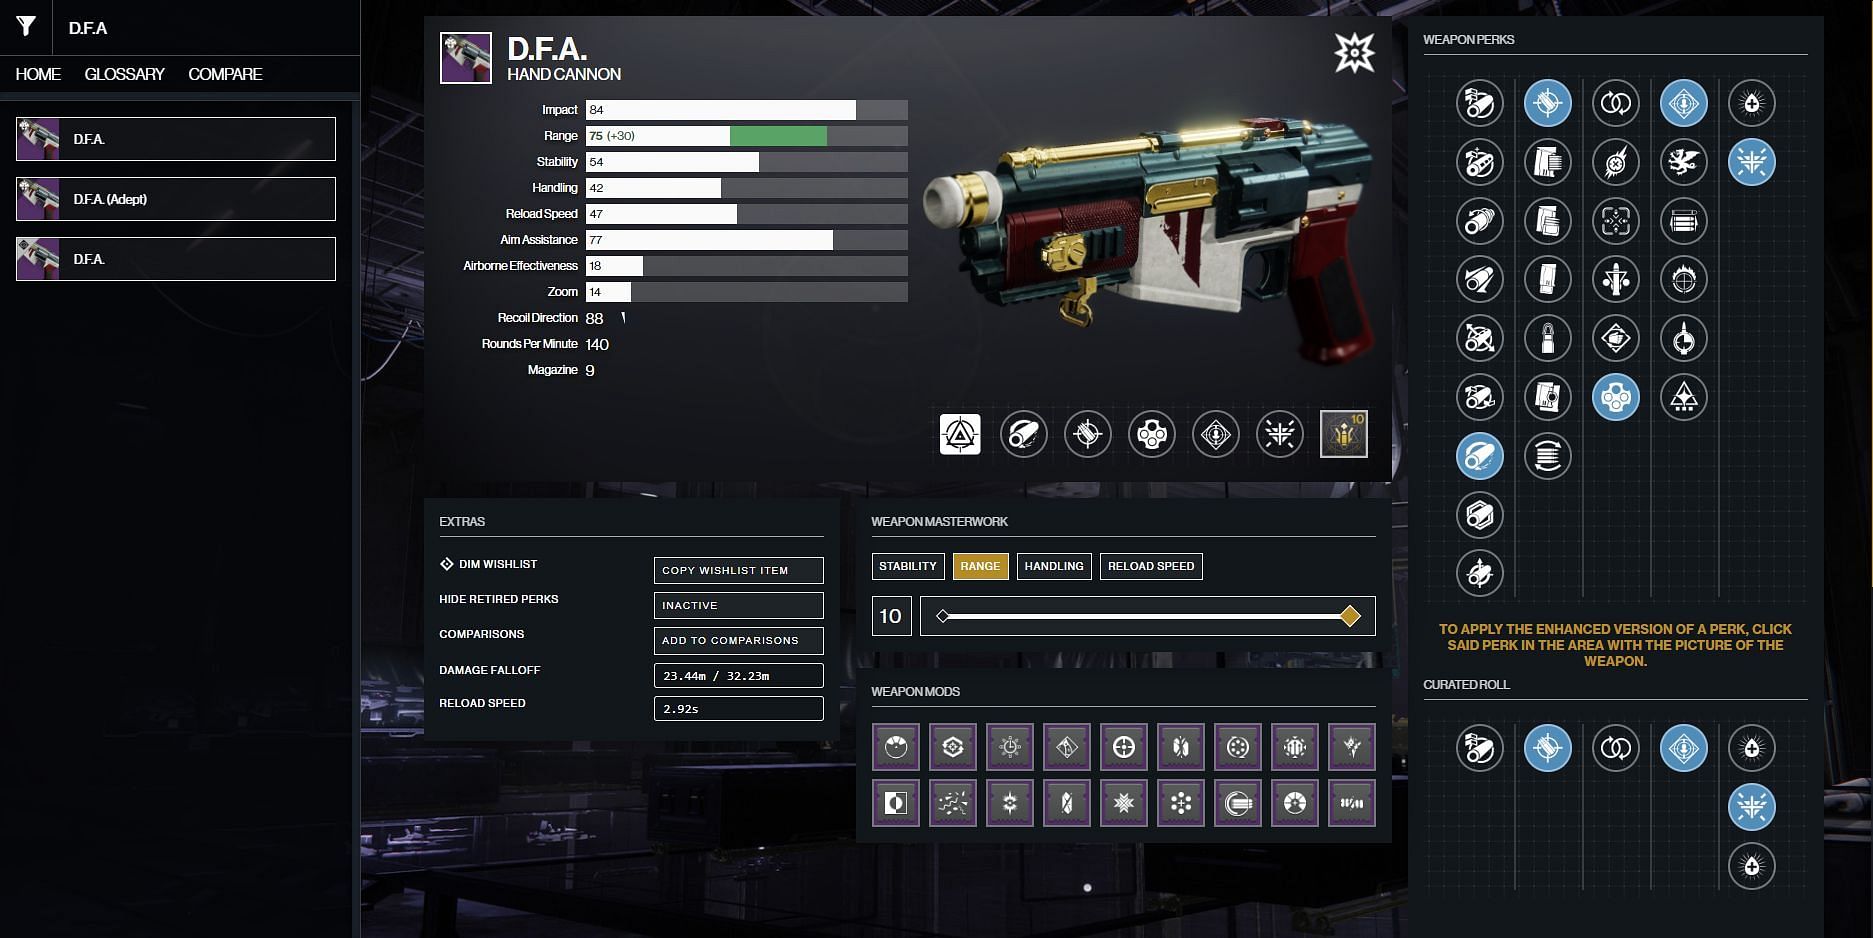 D.F.A. best perks for PvP in Destiny 2 (Image via D2Gunsmith)